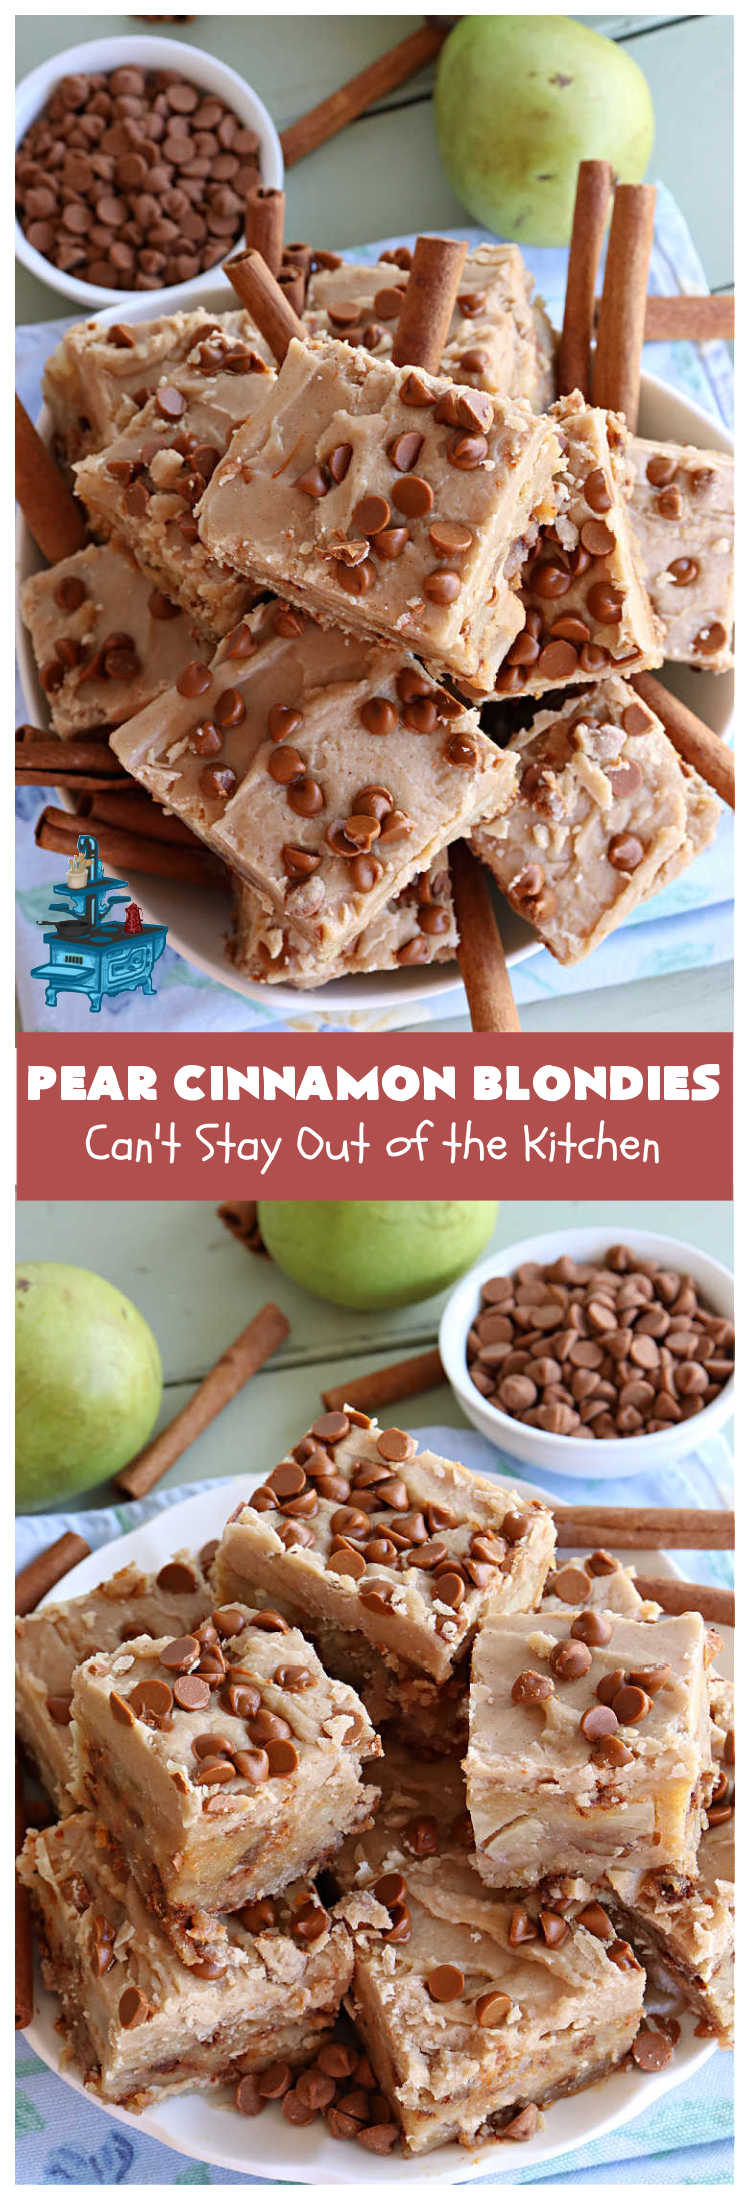 Pear Cinnamon Blondies | Can't Stay Out of the Kitchen | these luscious #blondies are very sweet, rich, decadent & heavenly. The bars include #bananas & #pears to keep them moist, #walnuts & #CinnamonChips to add texture & sweetness. They also have a fantastic #BrownedButterIcing on top with more #cinnamon chips to add even more decadence. Excellent for any kind of potluck or #holiday activity. Every bite will rock your world! #PearCinnamonBlondies